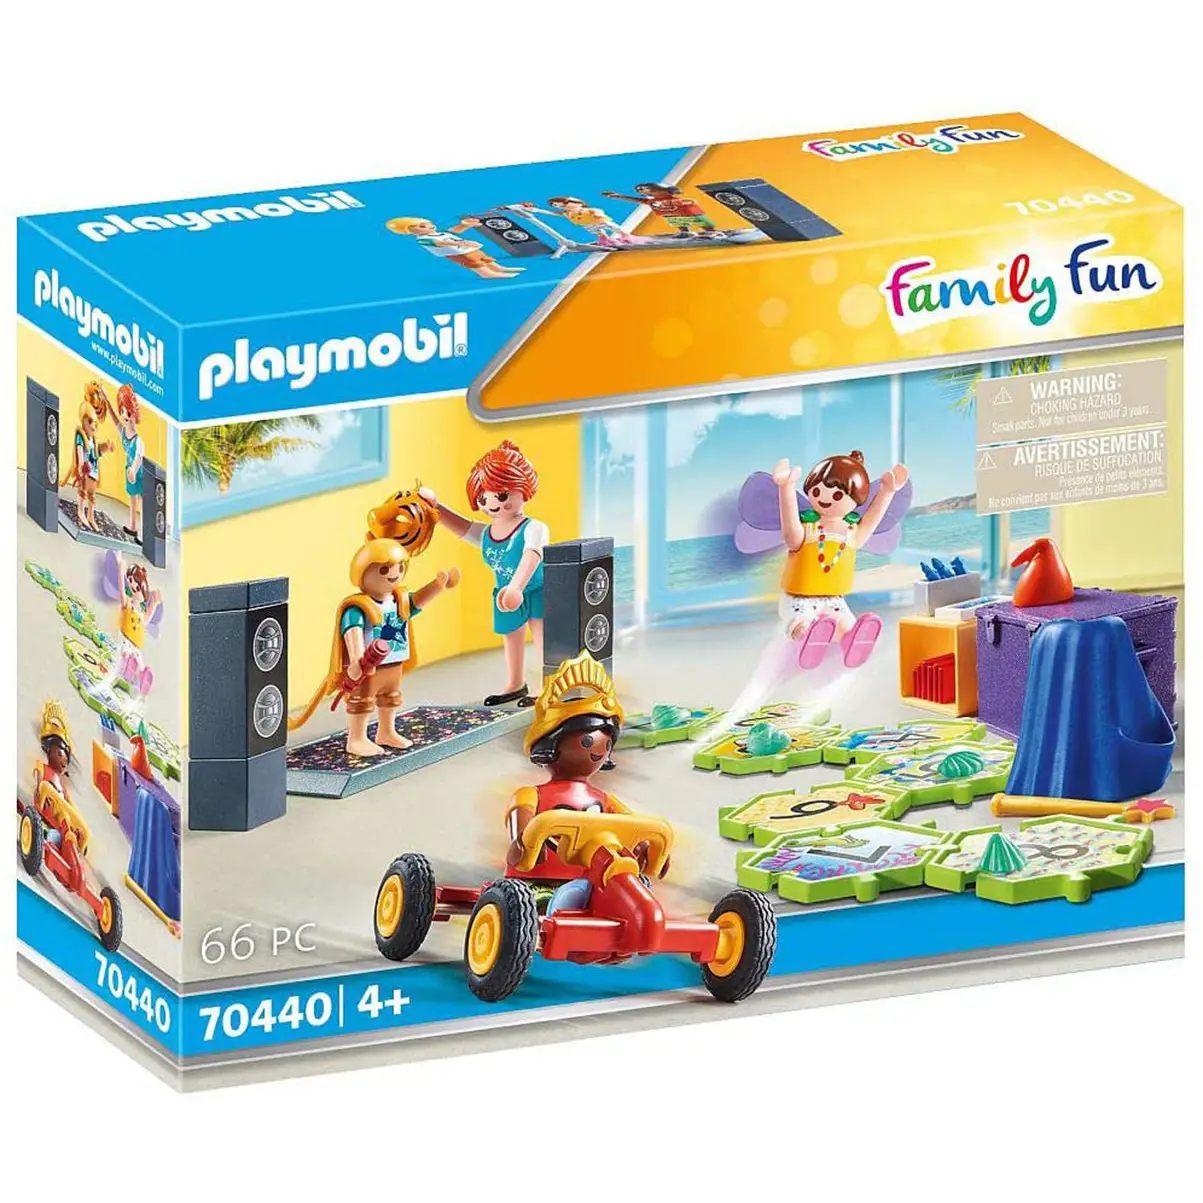 Playmobil Family Fun - Kids Club 70440 (for kids 4 years old